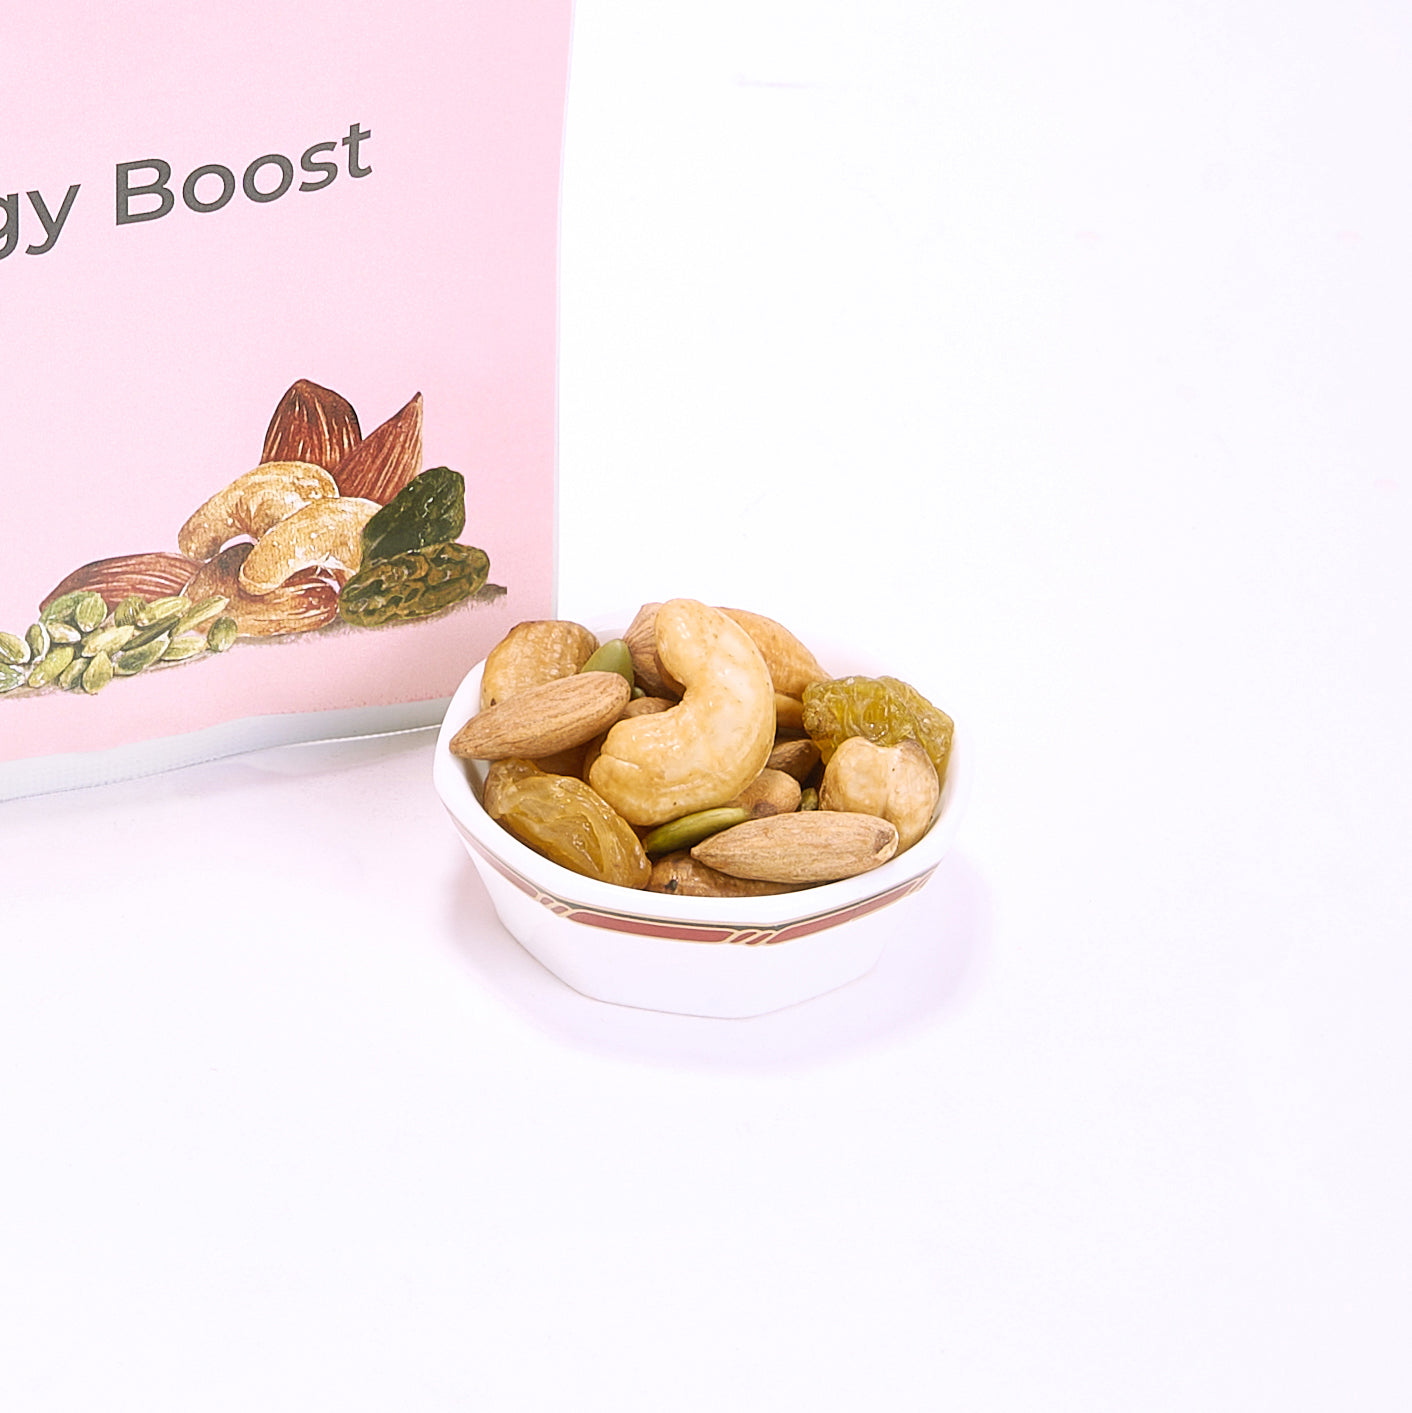 Energy Boost Trail Mix